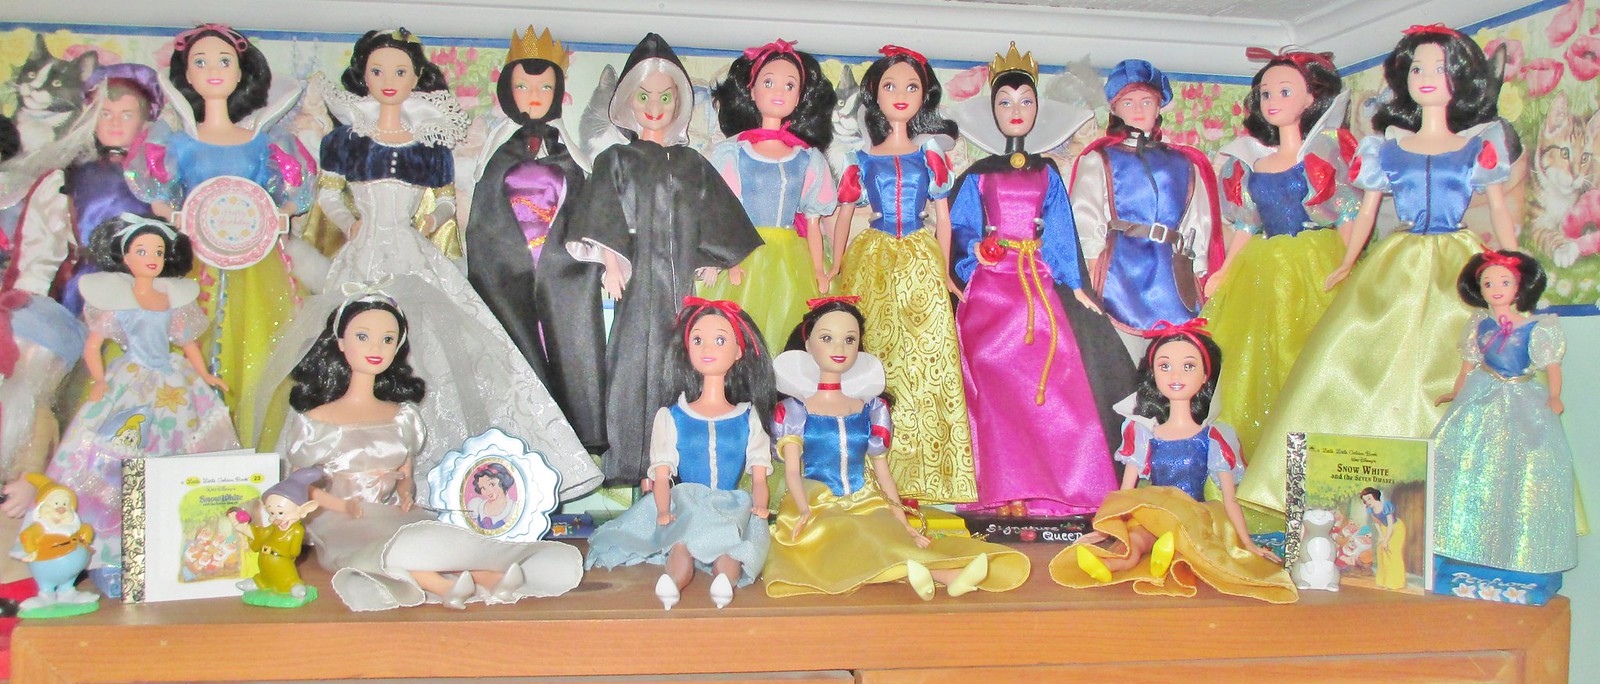 My Snow White Display 2014 (part 2), Compared to present ti…